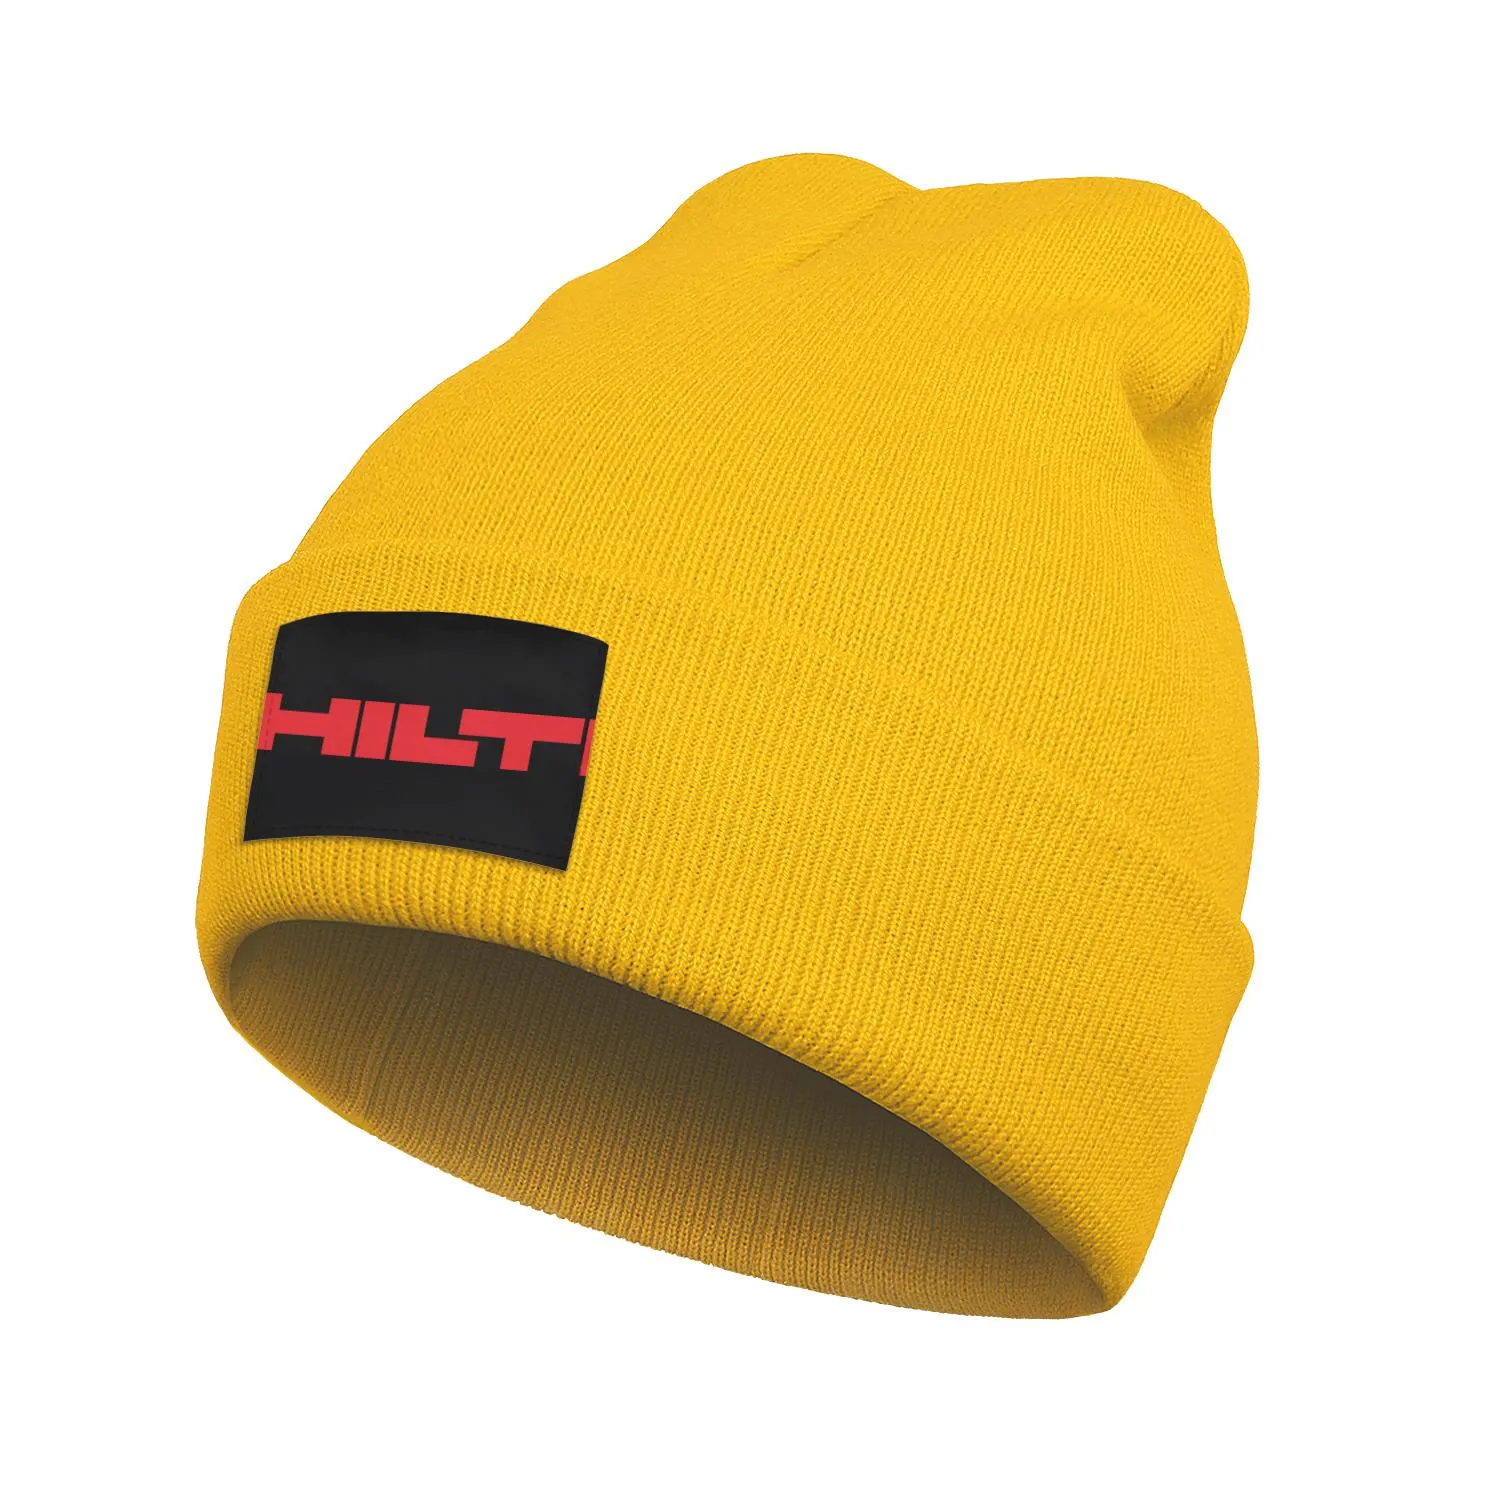 Fashion Hilti Ag Company Group Tools Winter Ski Beanie Hats Late Under Helmets Flash Gold Marble White Vintage Old3182595